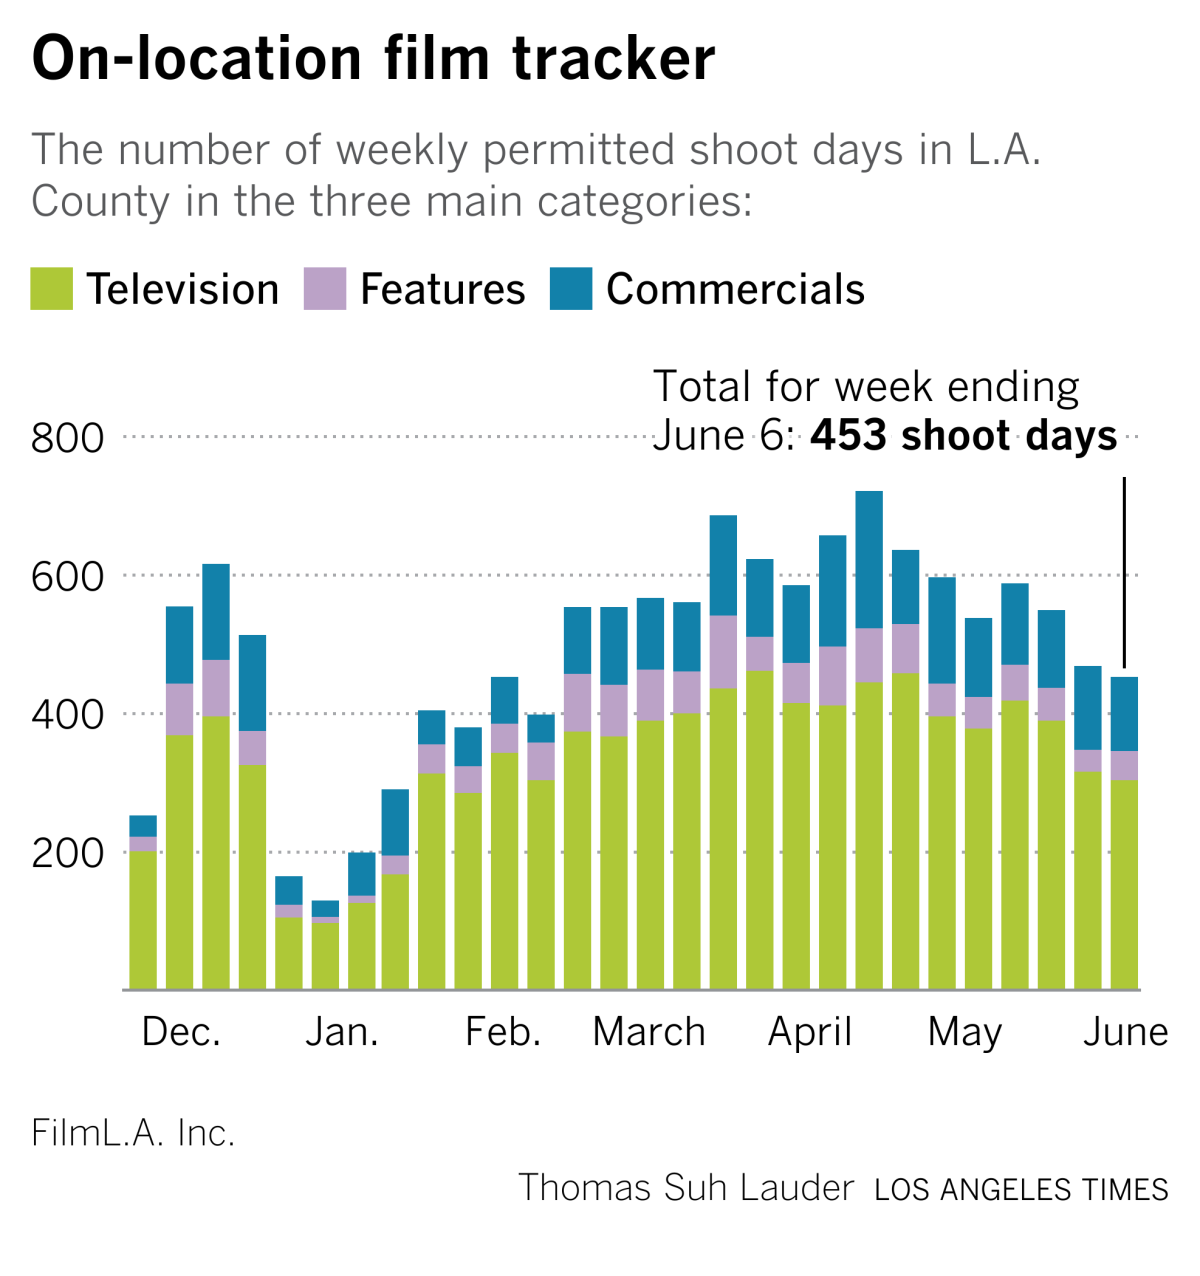 On-location production tracker